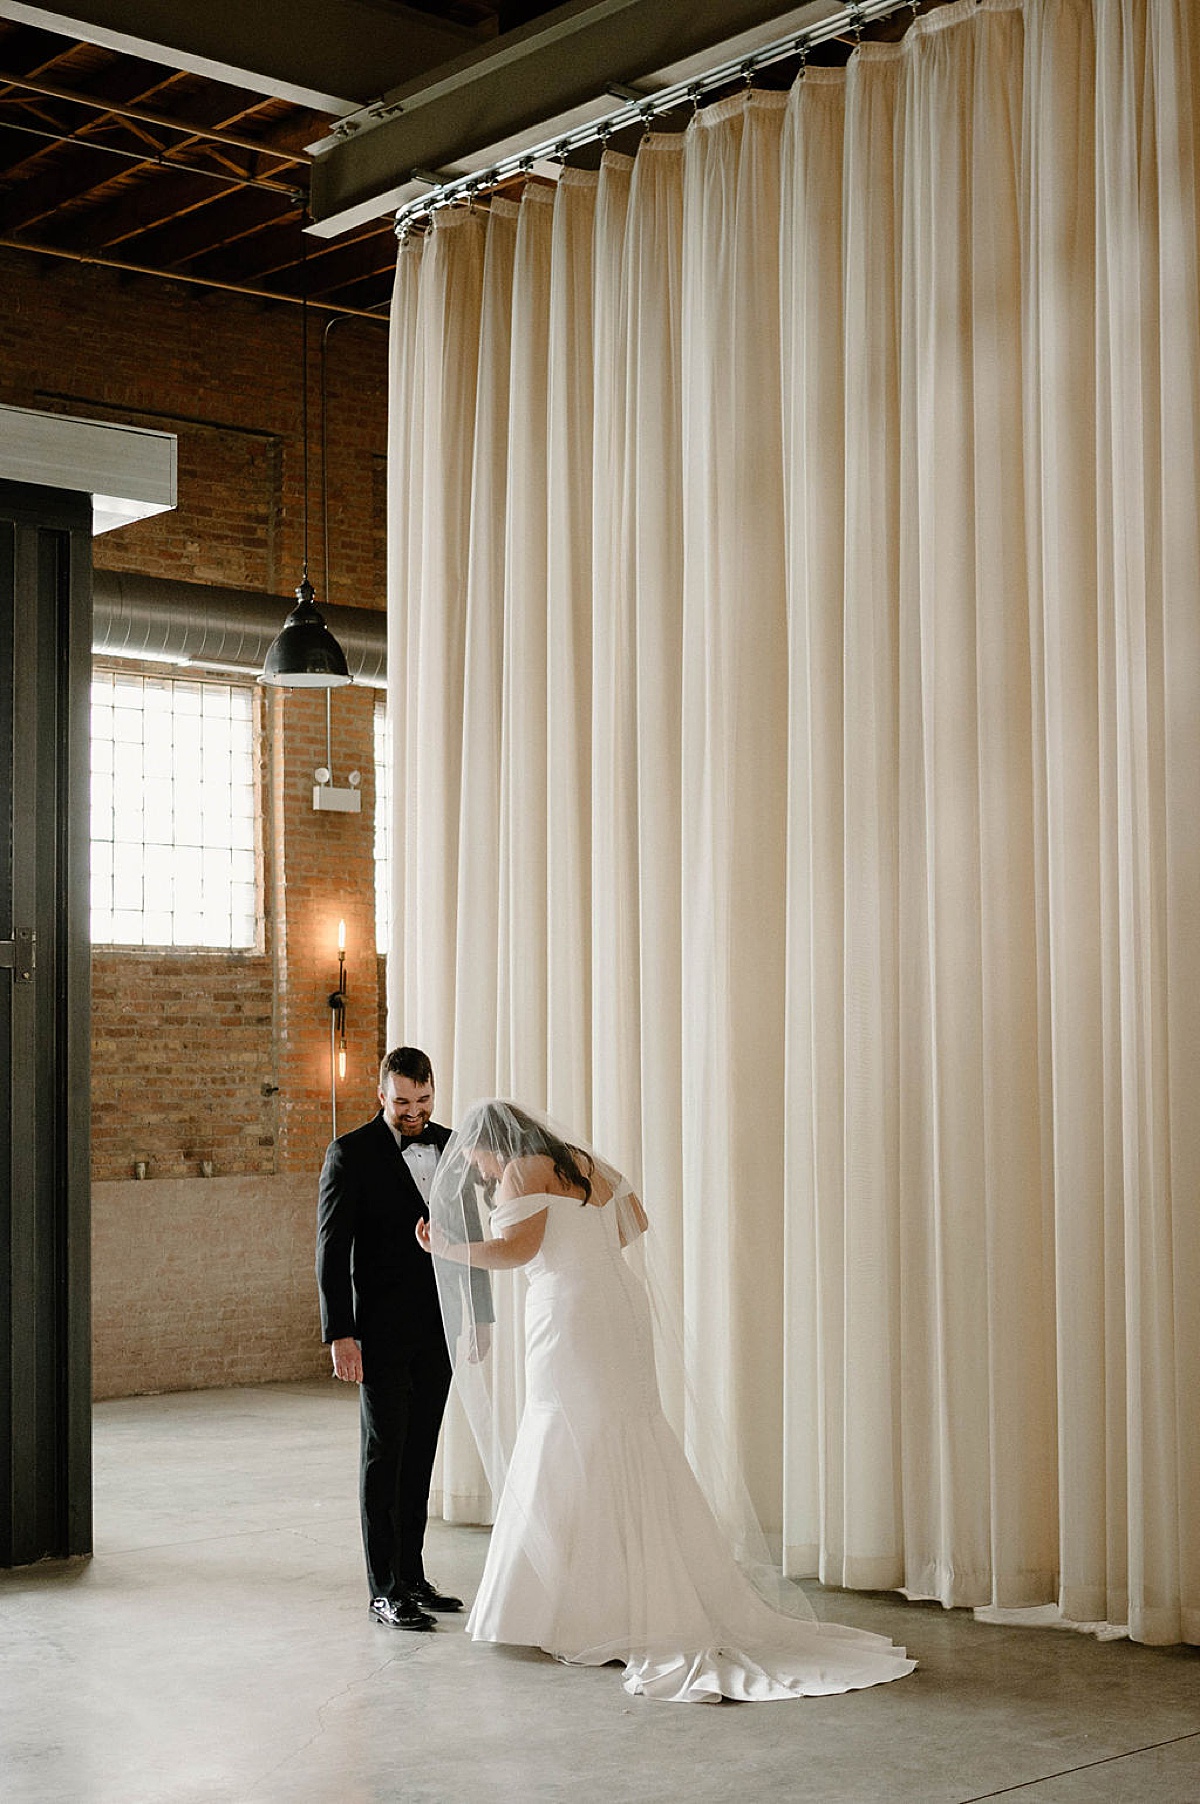 groom smiles as bride adjusts elegant gown and veil during first look shot by Chicago wedding photographer